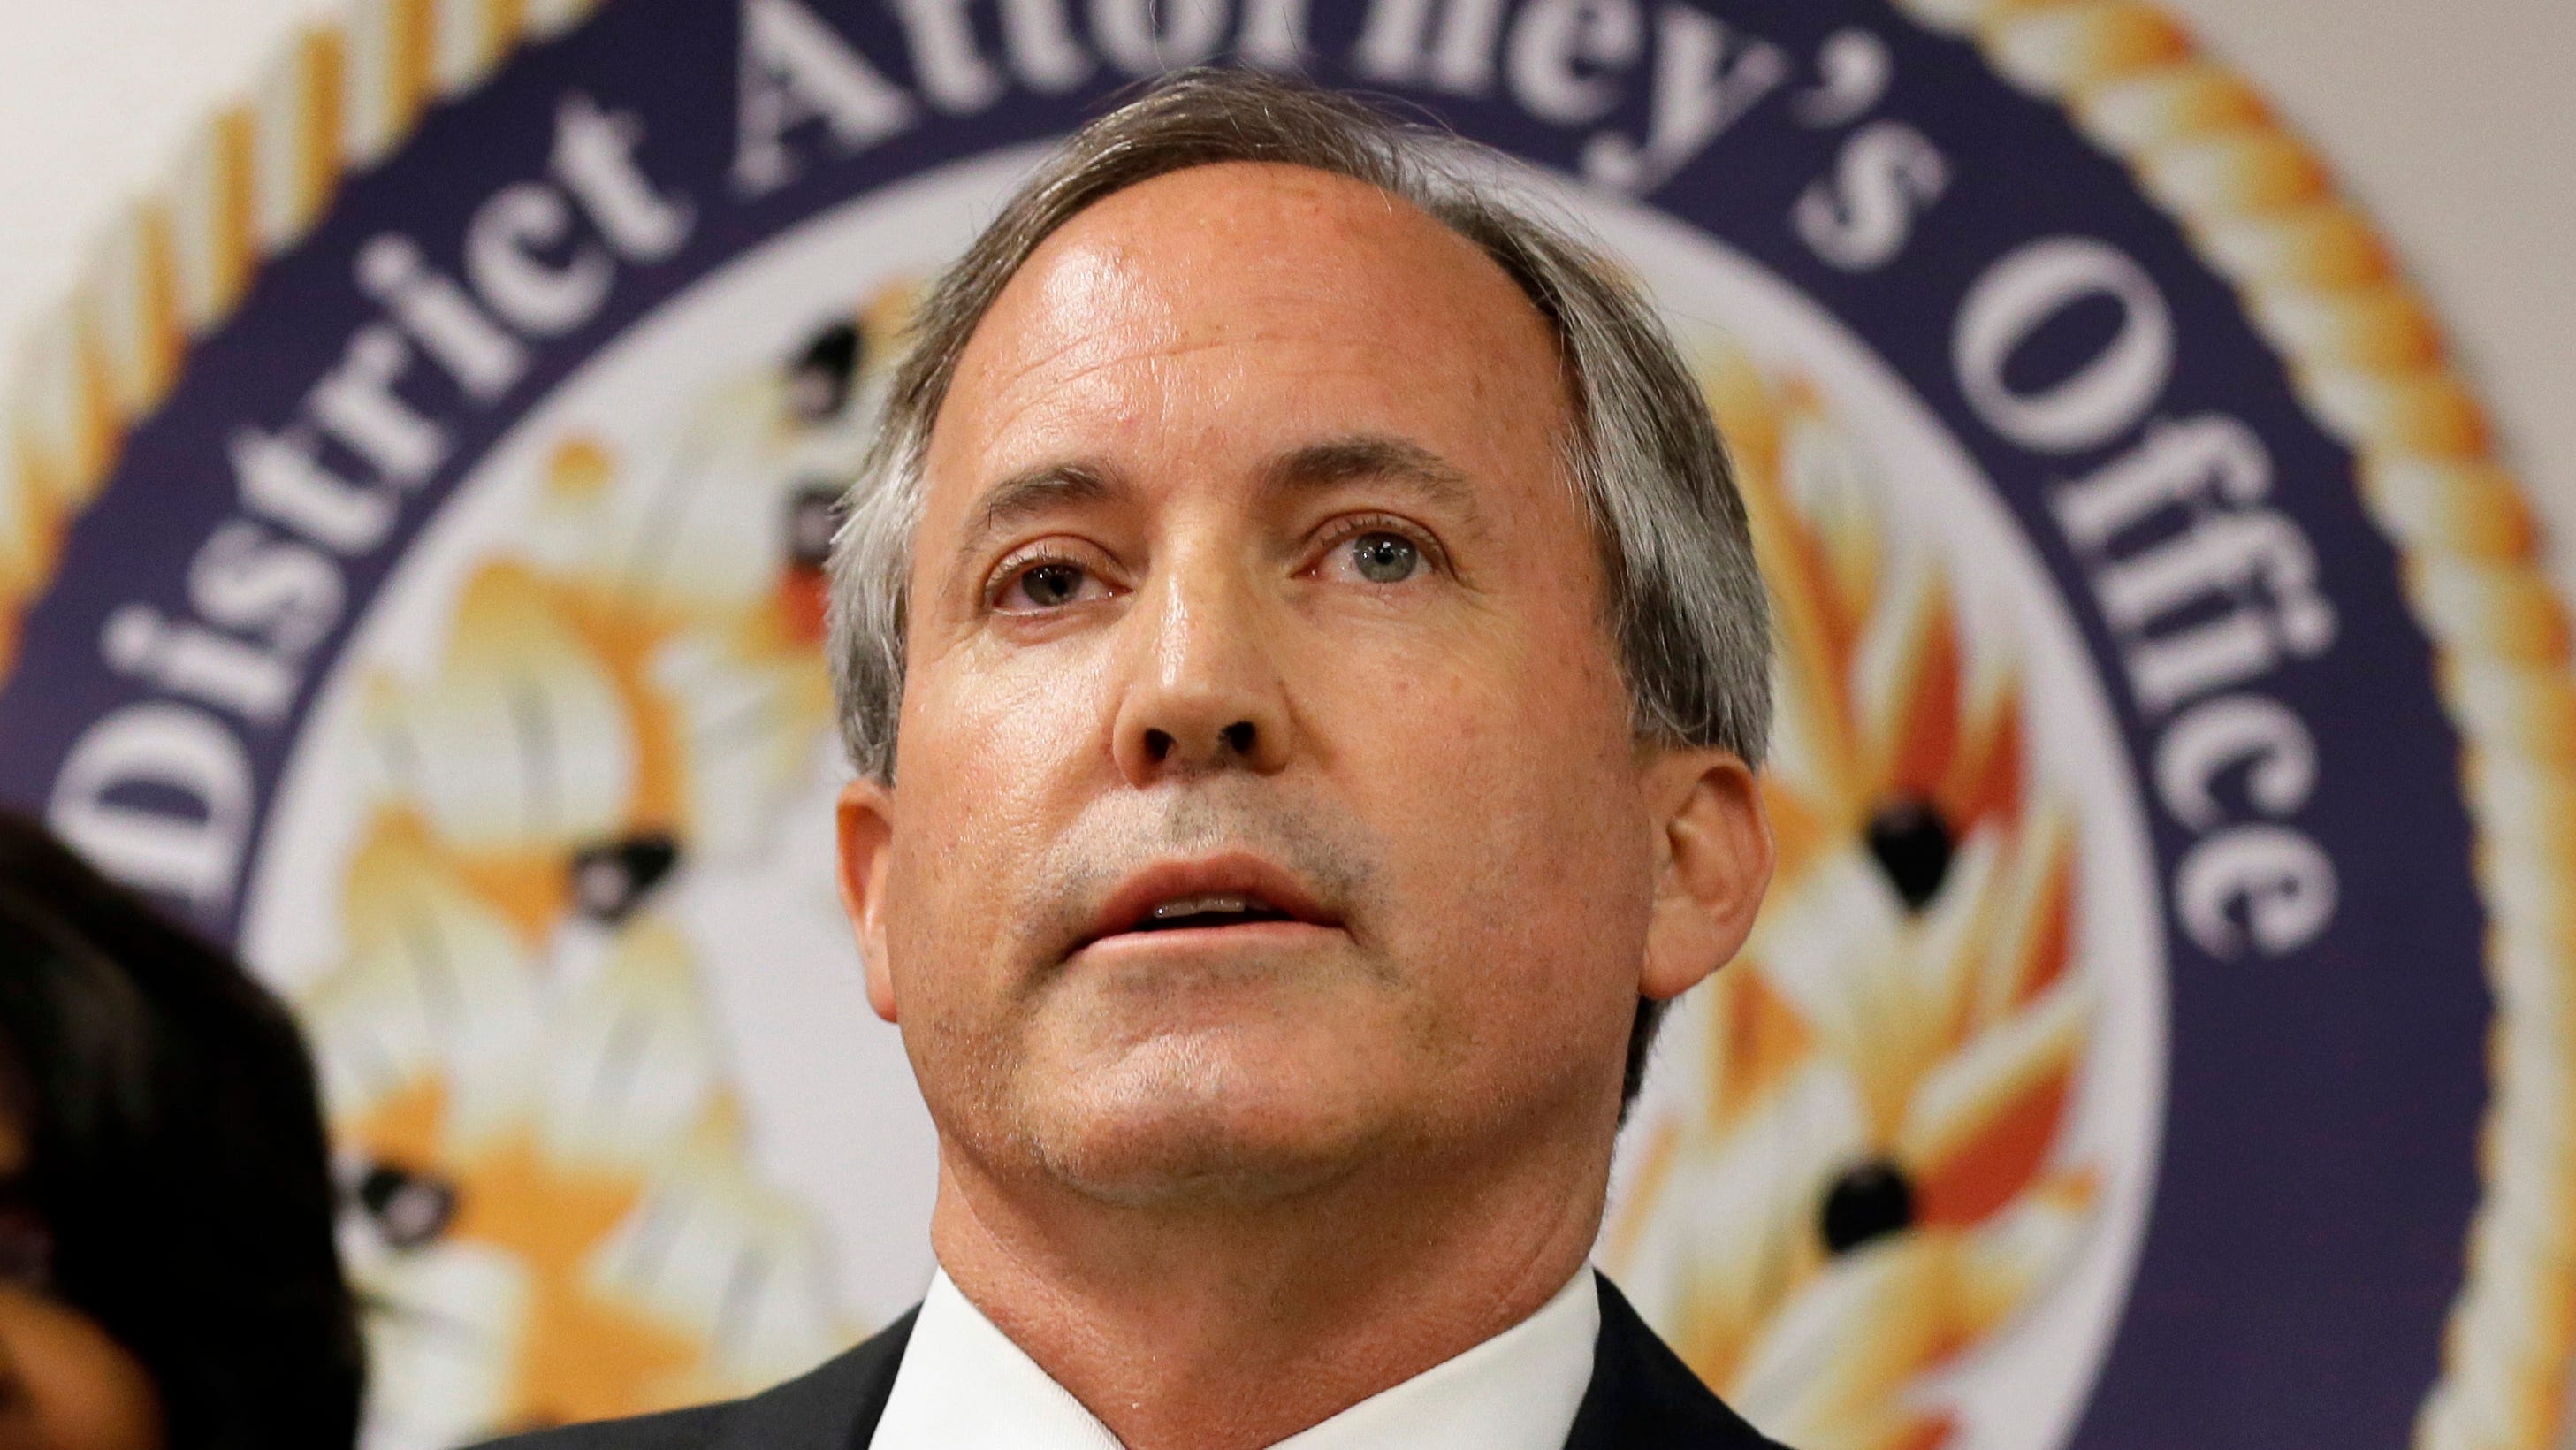 Texas Attorney General Ken Paxton speaks at a news conference in Dallas on June 22, 2017. After years of legal and ethical scandals swirling around Texas Republican Attorney General Paxton, the state's GOP-controlled House of Representatives has moved toward an impeachment vote that could quickly throw him from office.